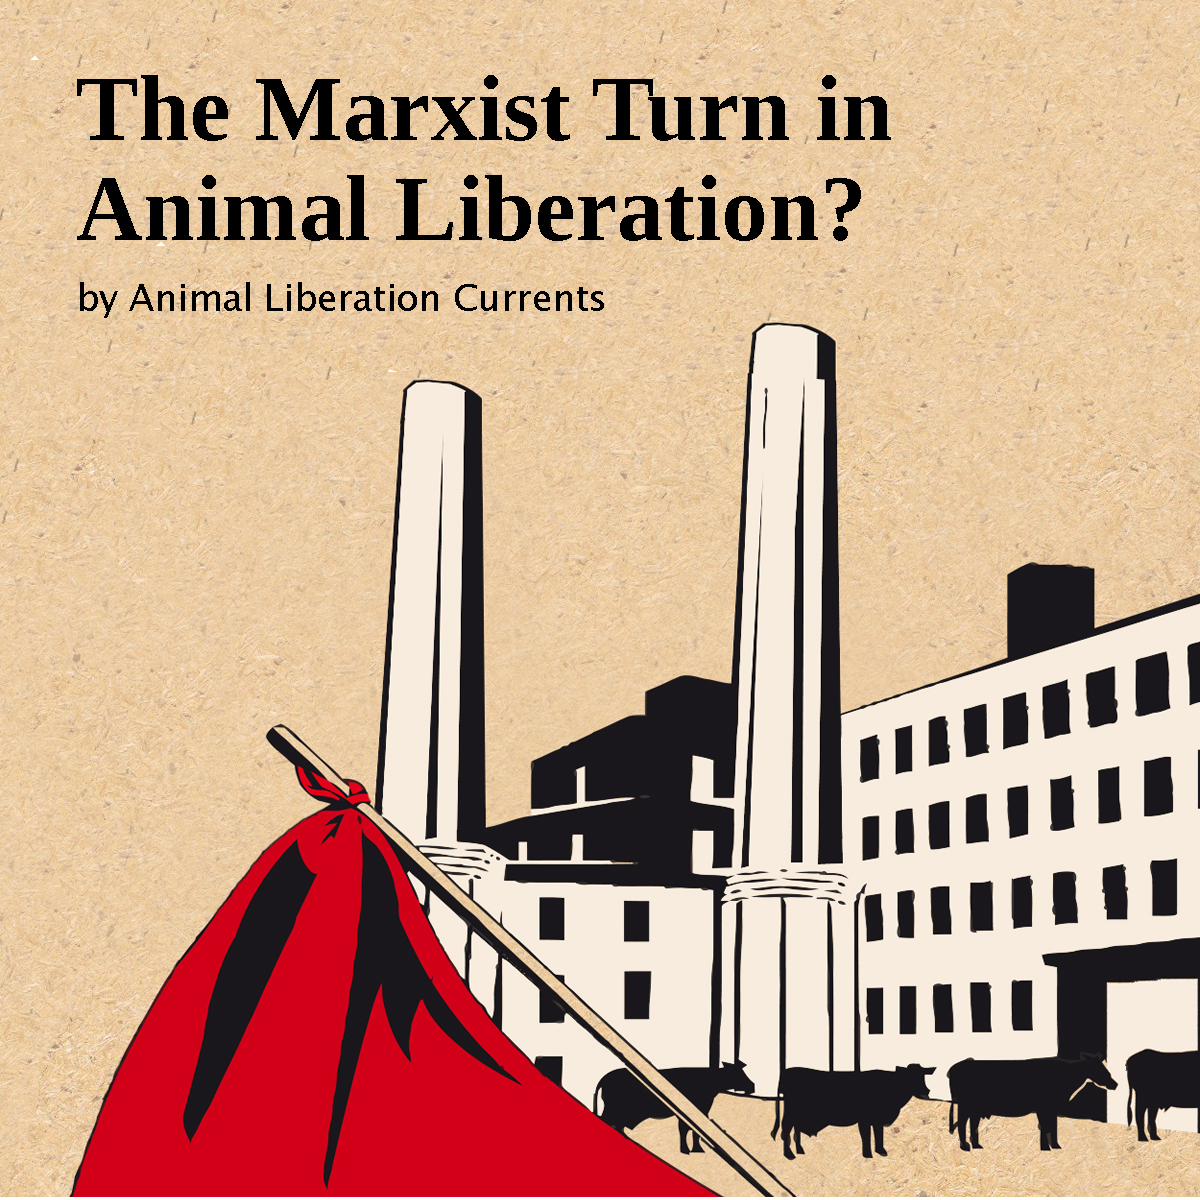 The Marxist Turn in Animal Liberation?